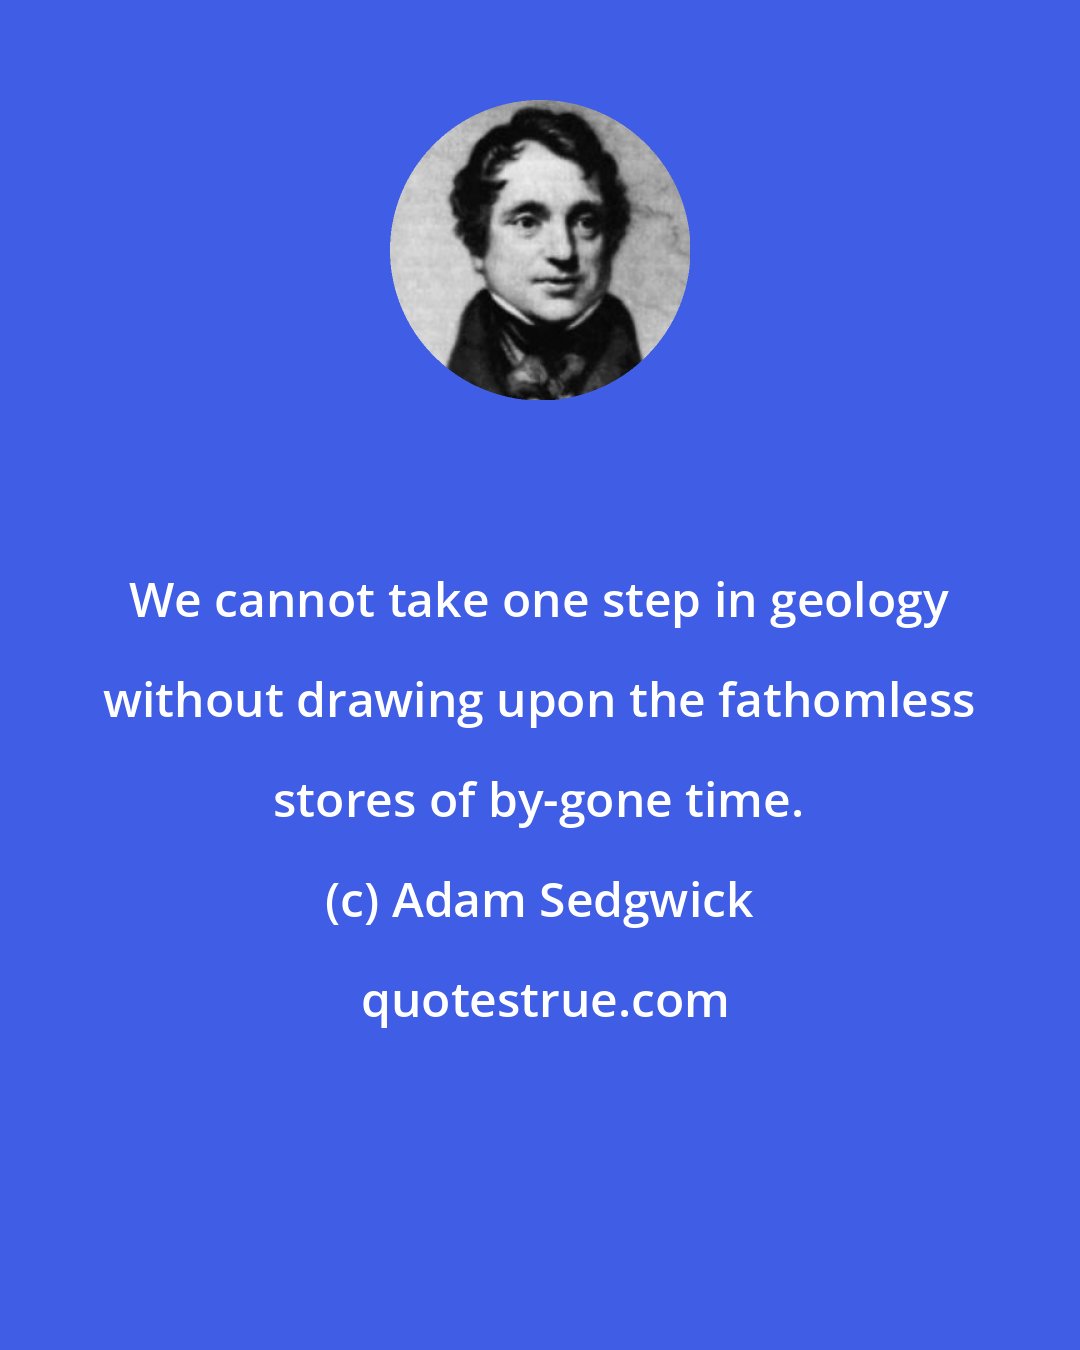 Adam Sedgwick: We cannot take one step in geology without drawing upon the fathomless stores of by-gone time.